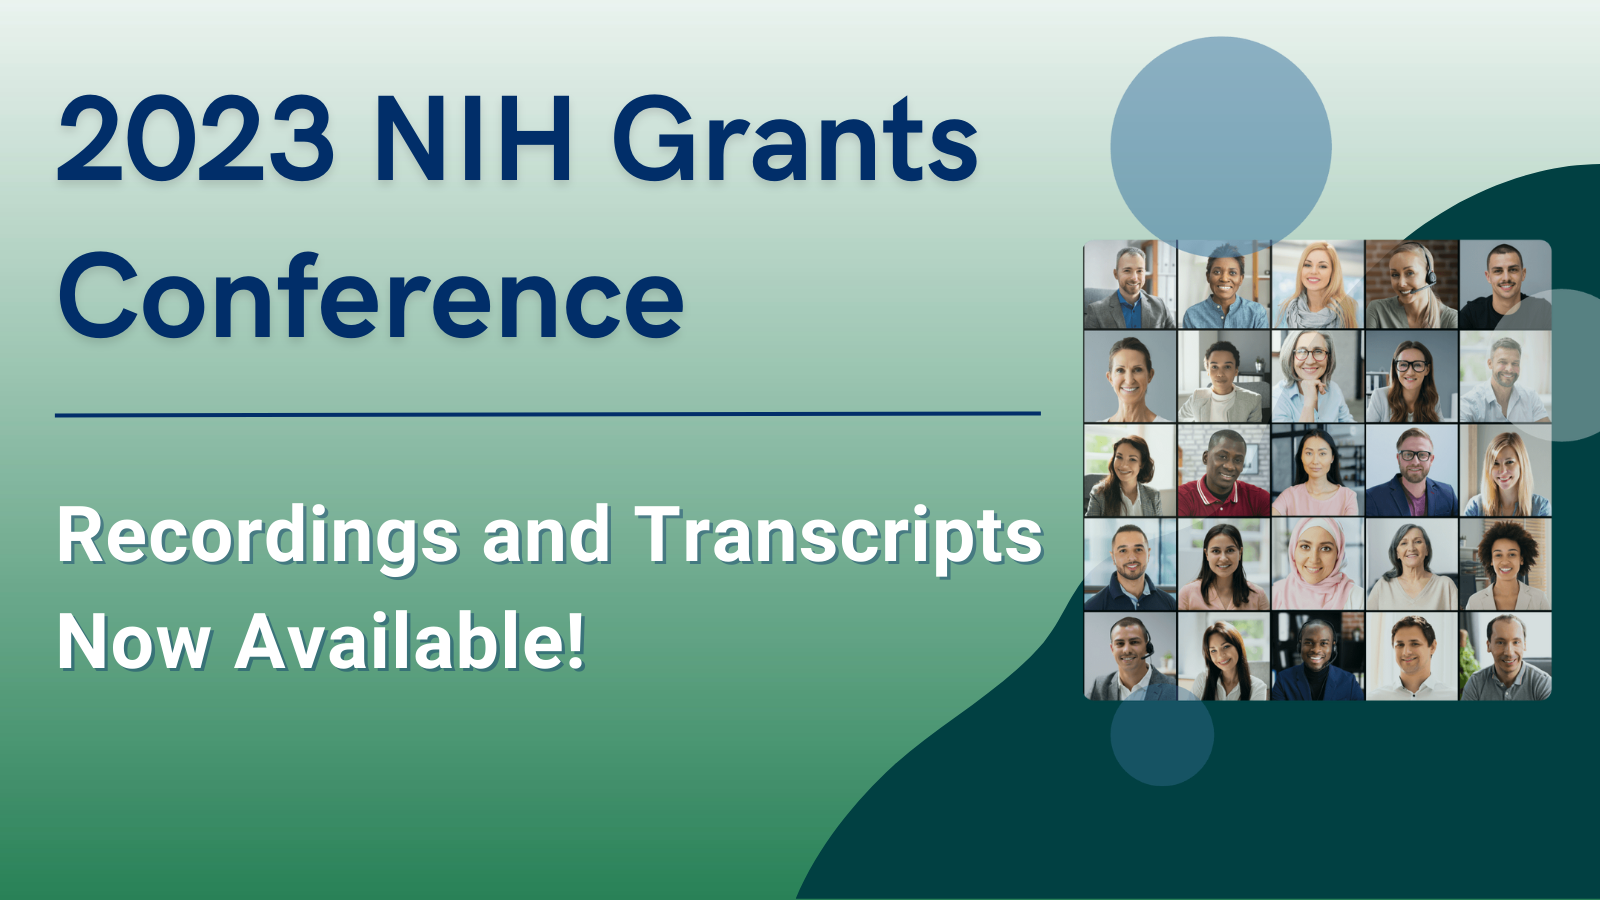 There’s More to Love About the NIH Grants Conference Recordings and